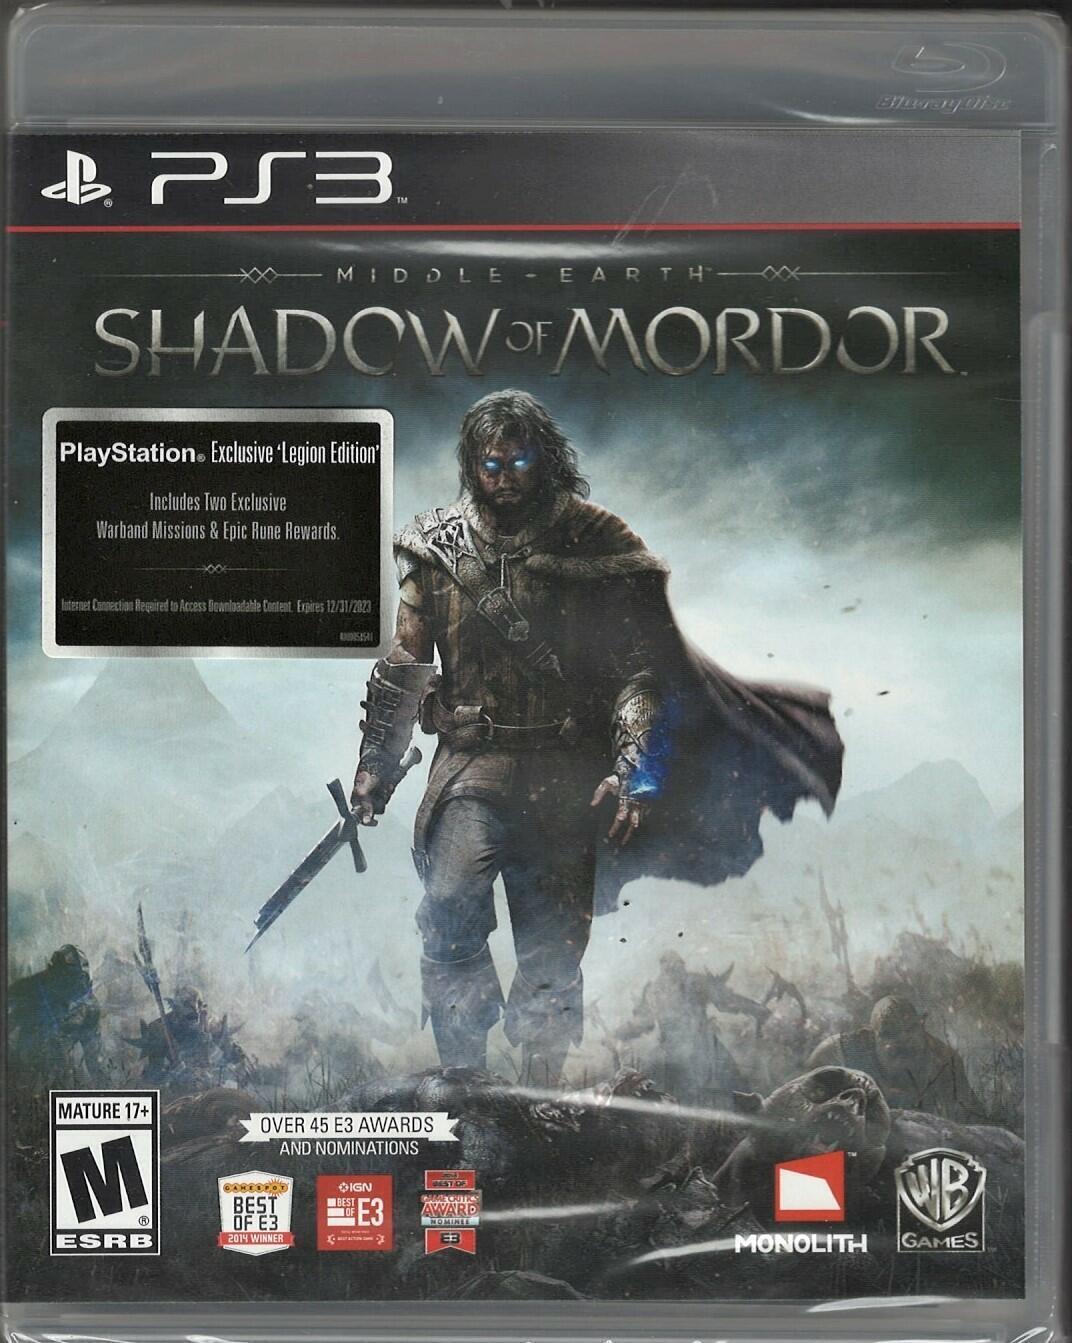 Winner Overall Game of the Year 2014 - Middle-earth: Shadow of